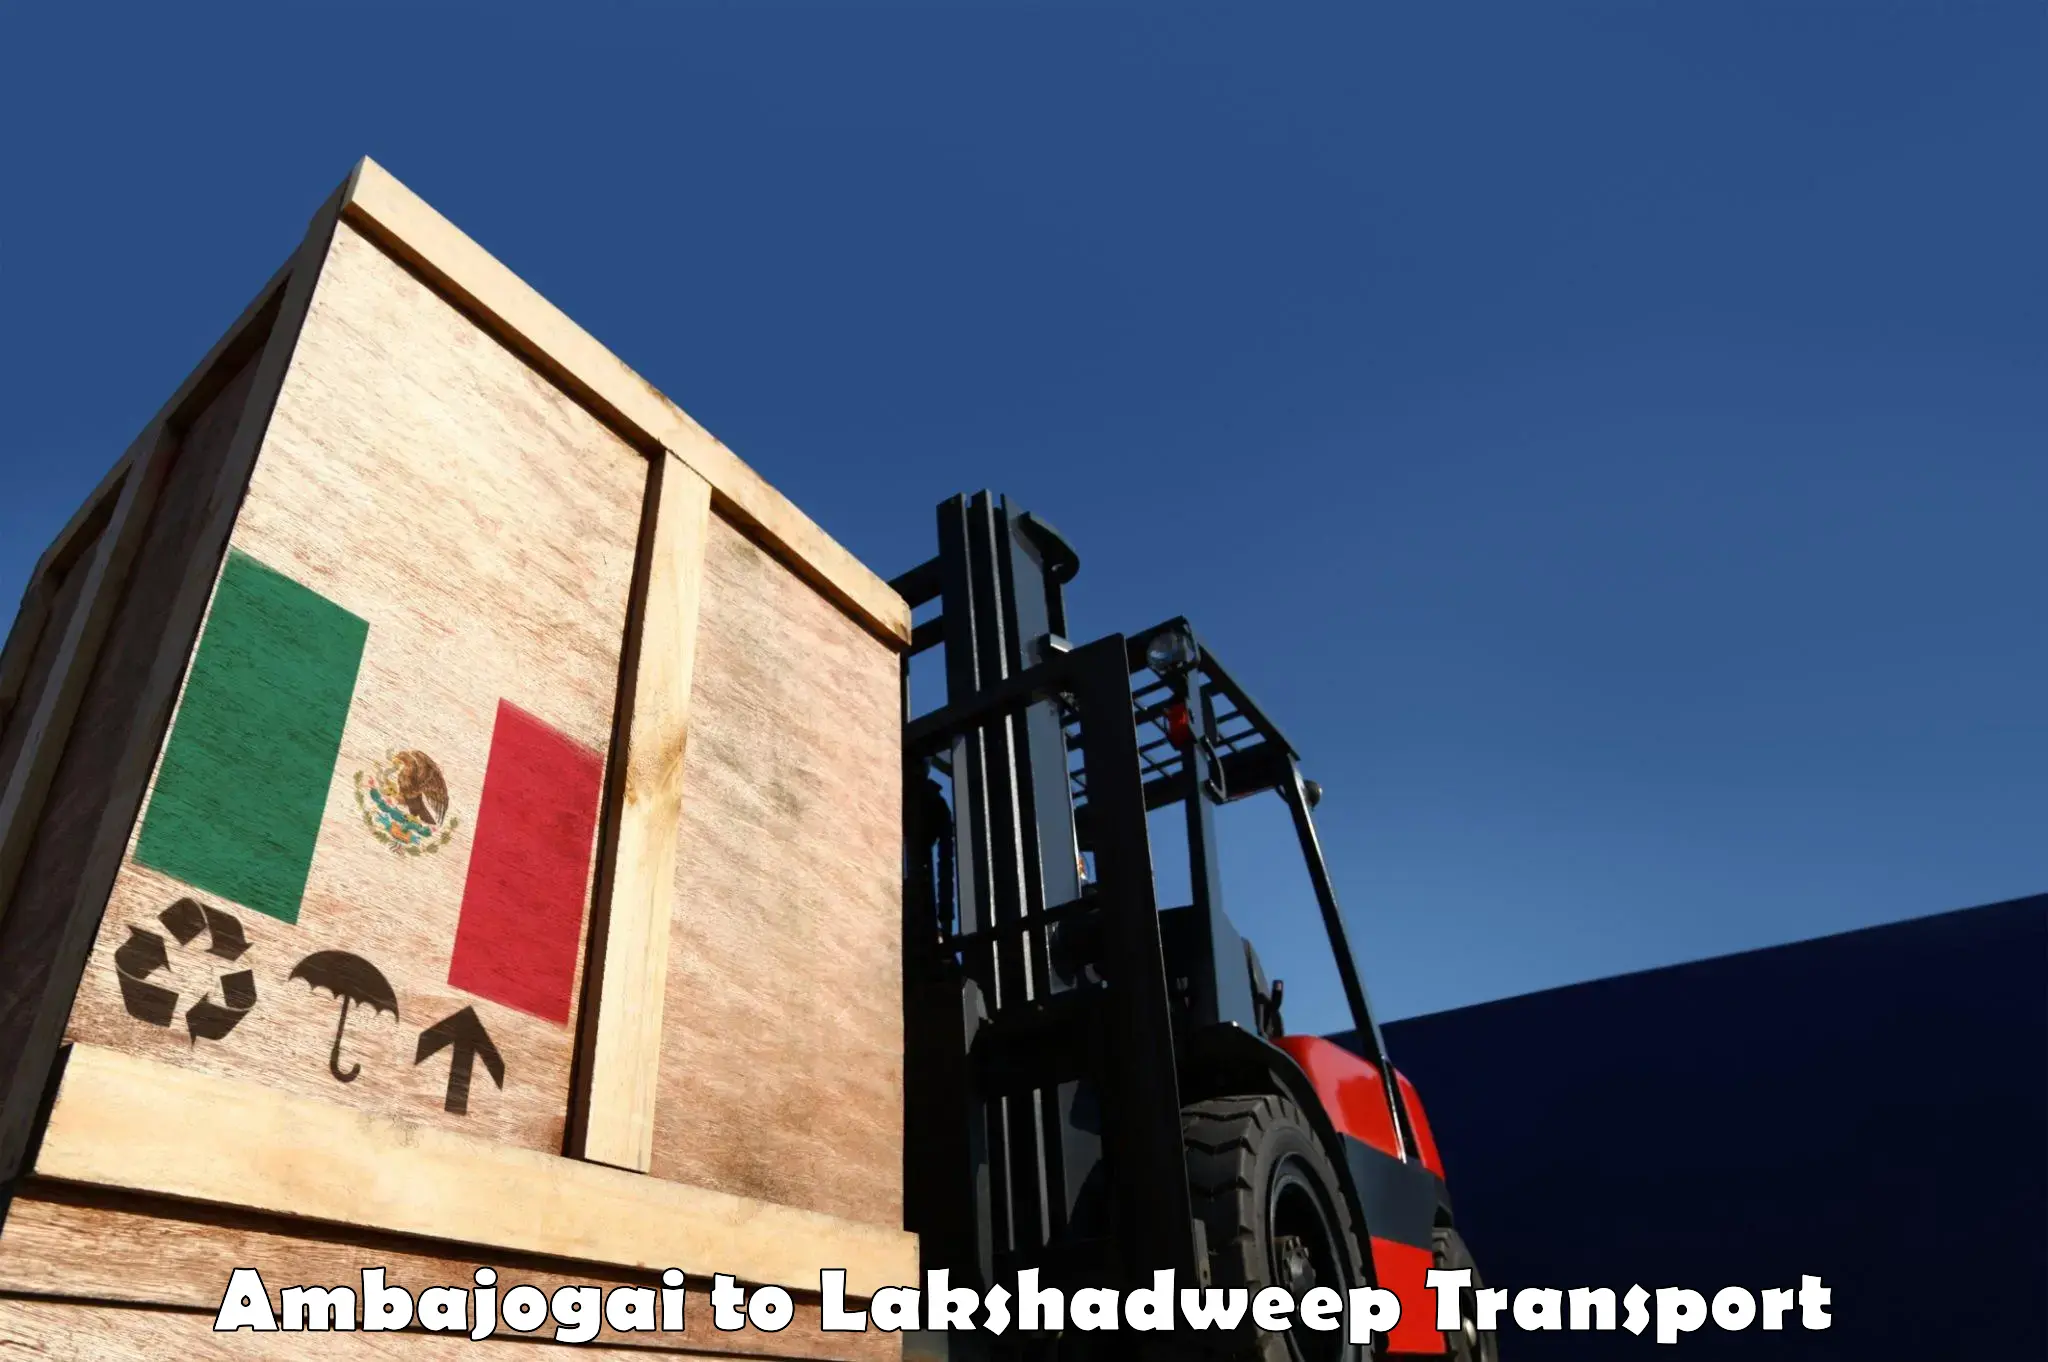 Truck transport companies in India in Ambajogai to Lakshadweep